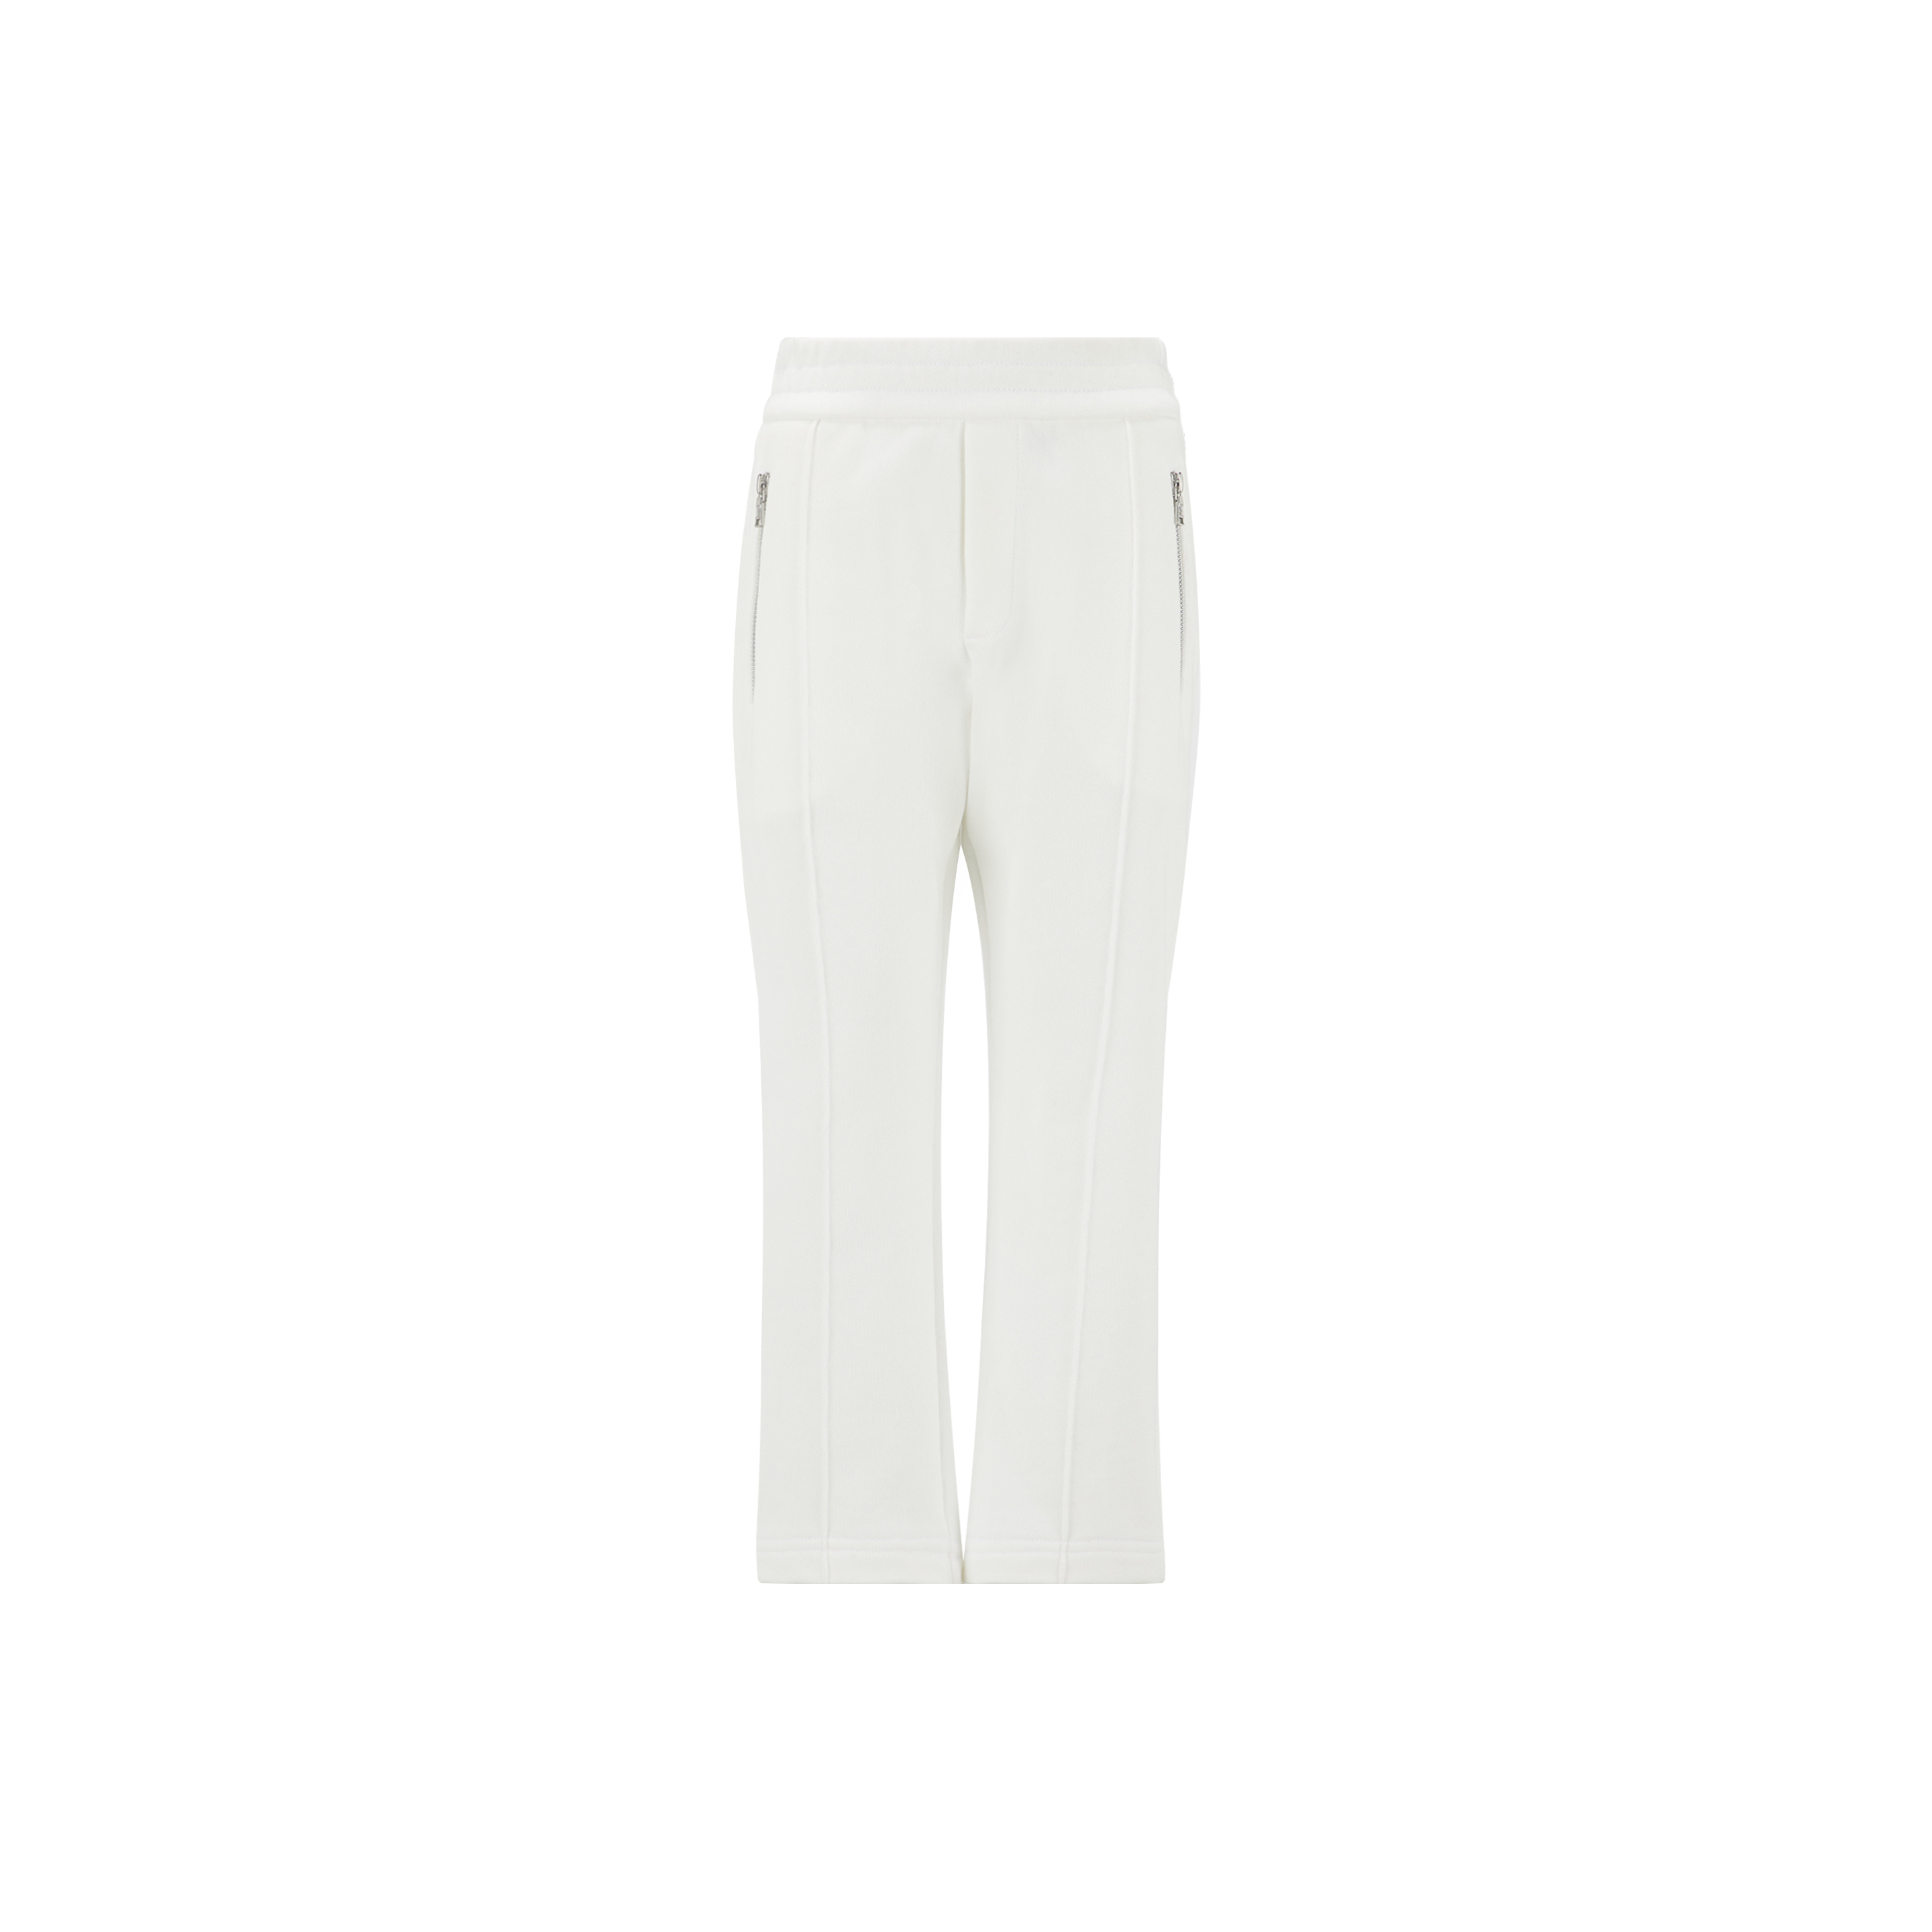 Moncler Kids' Logo Patch Trackpants, White, Size: 14y